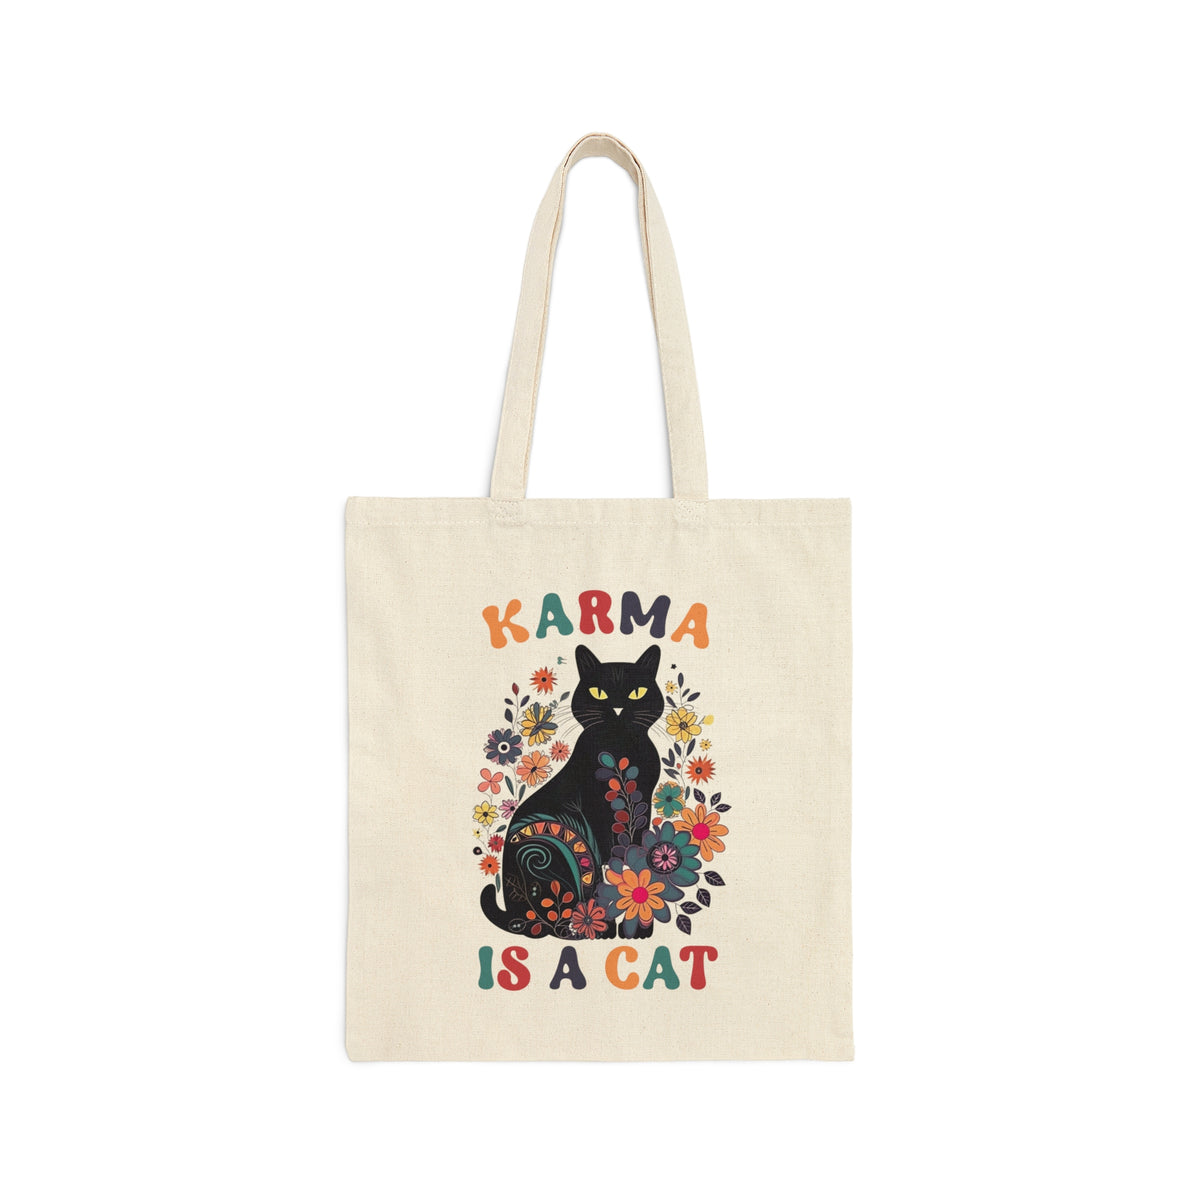 Karma Is a Cat Tote Bag | Funny Cat Shirt | Karma Bag | Mystical Tote | Black Cat Lover Gift | Cotton Canvas Tote Bag